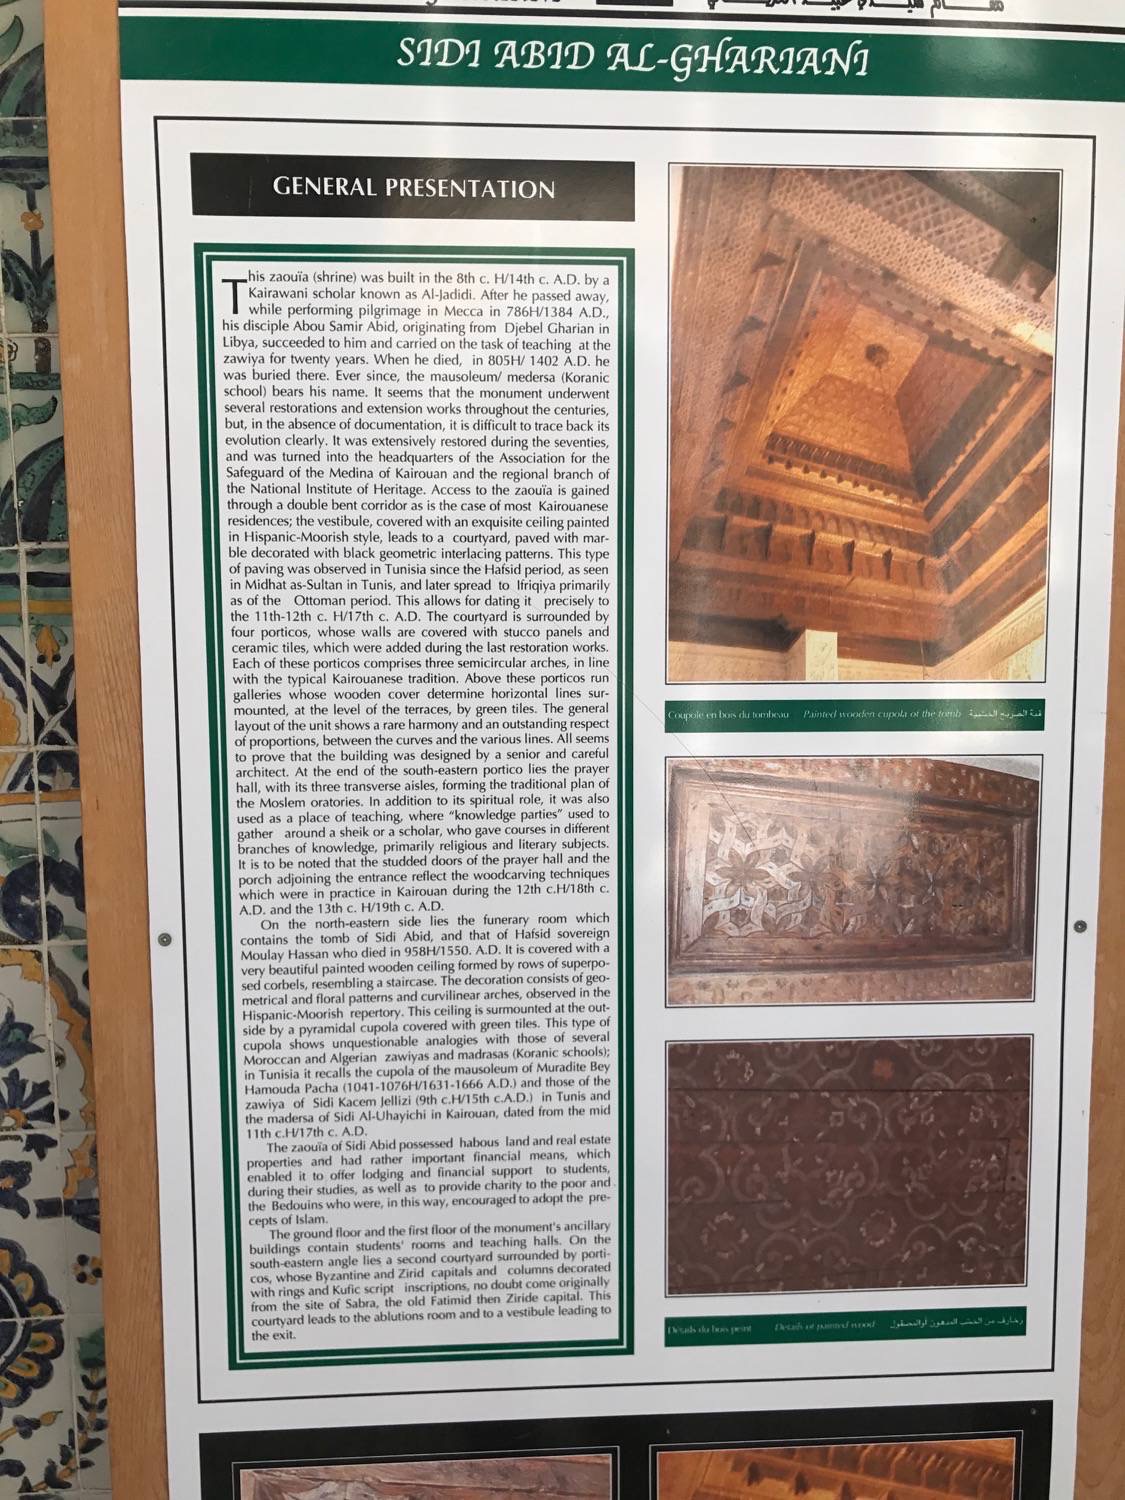 View of informational poster.